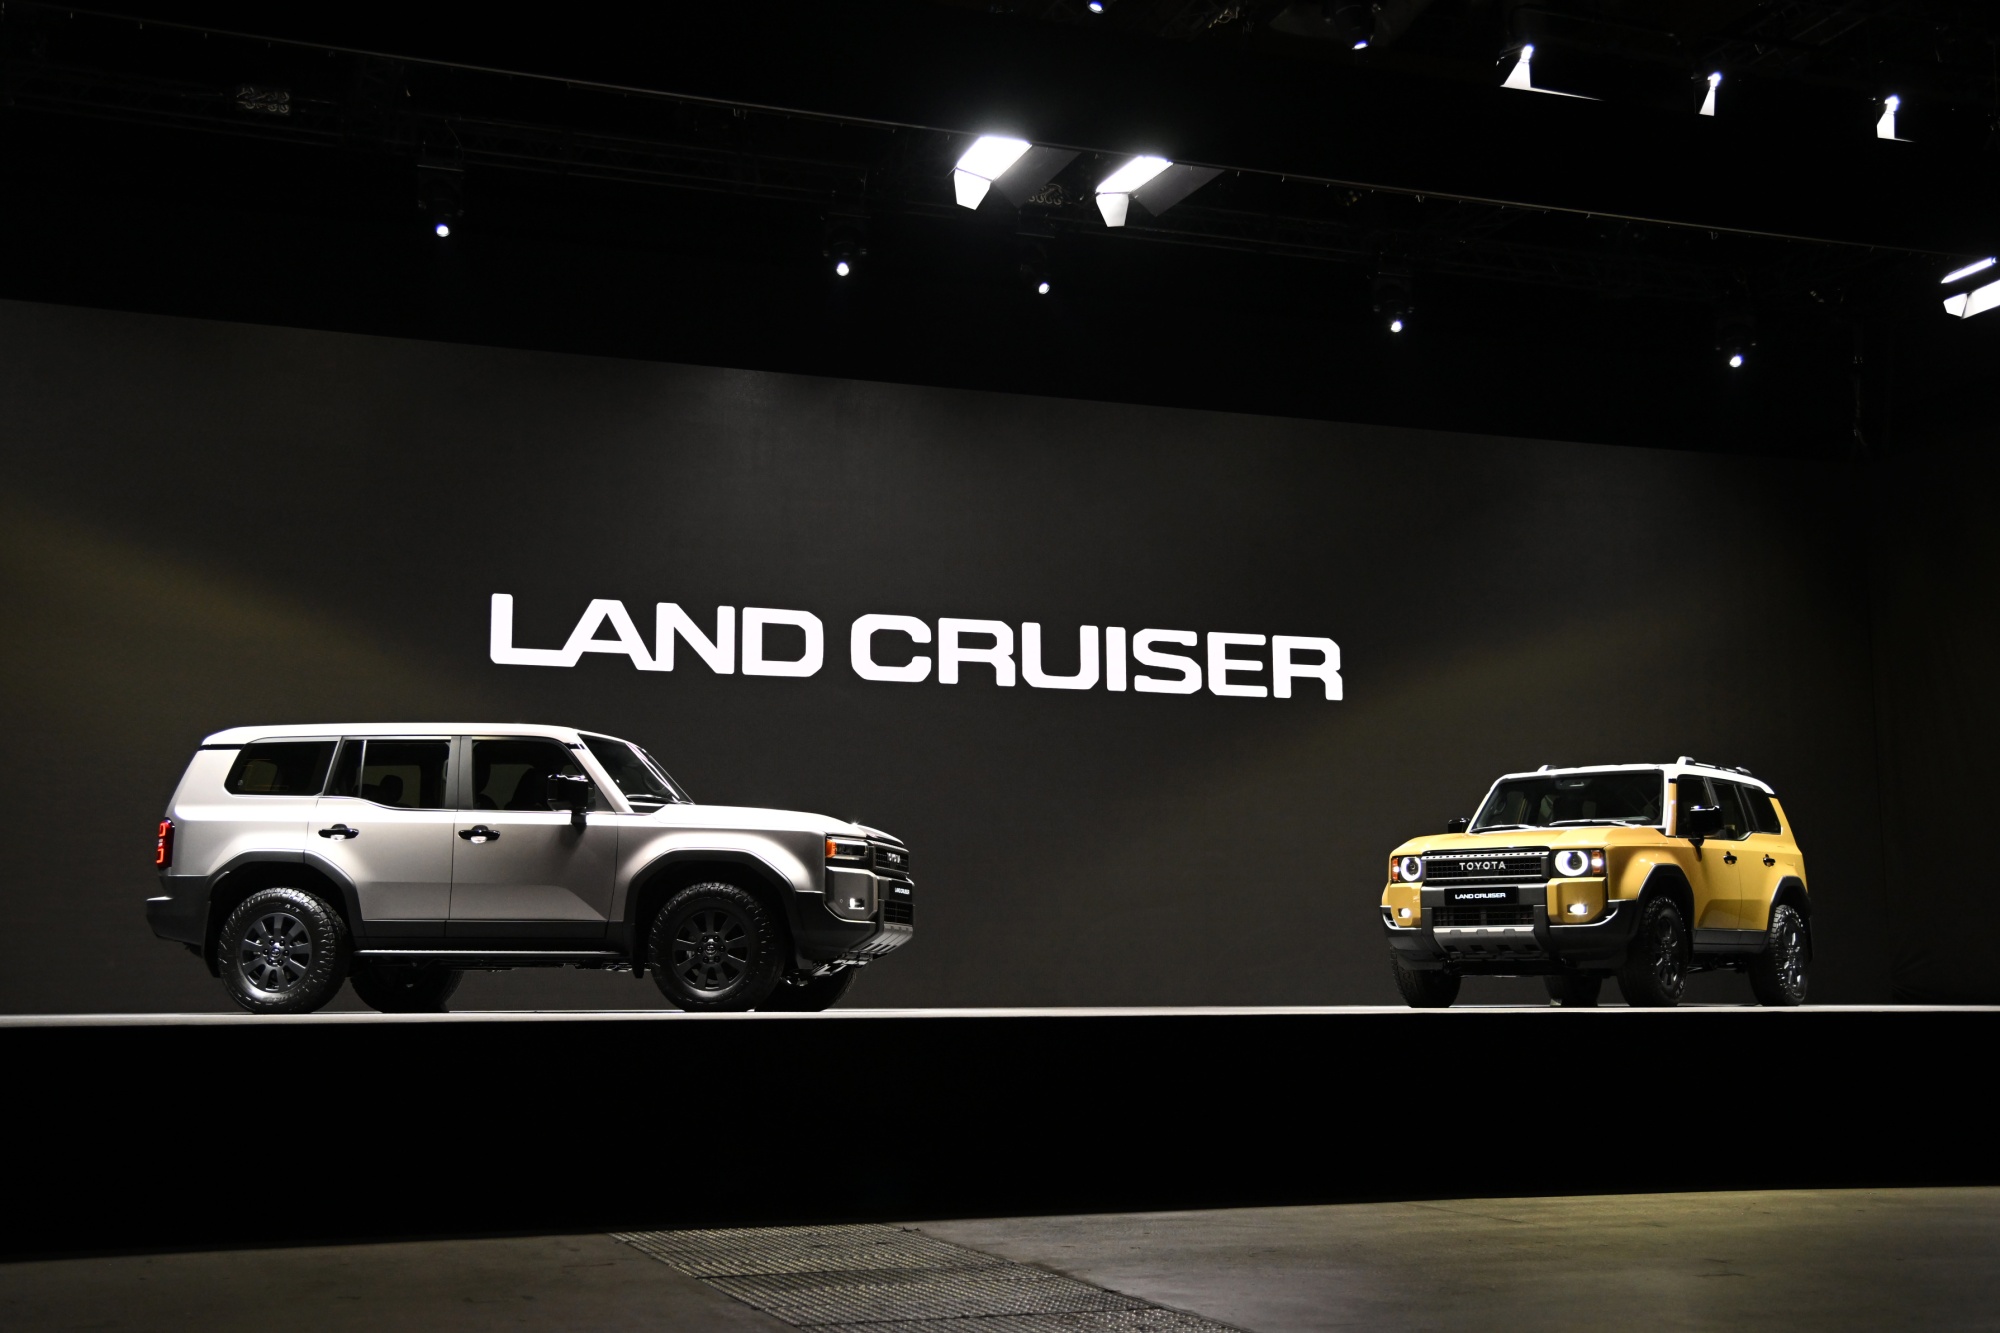 New Land Cruiser unveiled during its world premier in Tokyo.